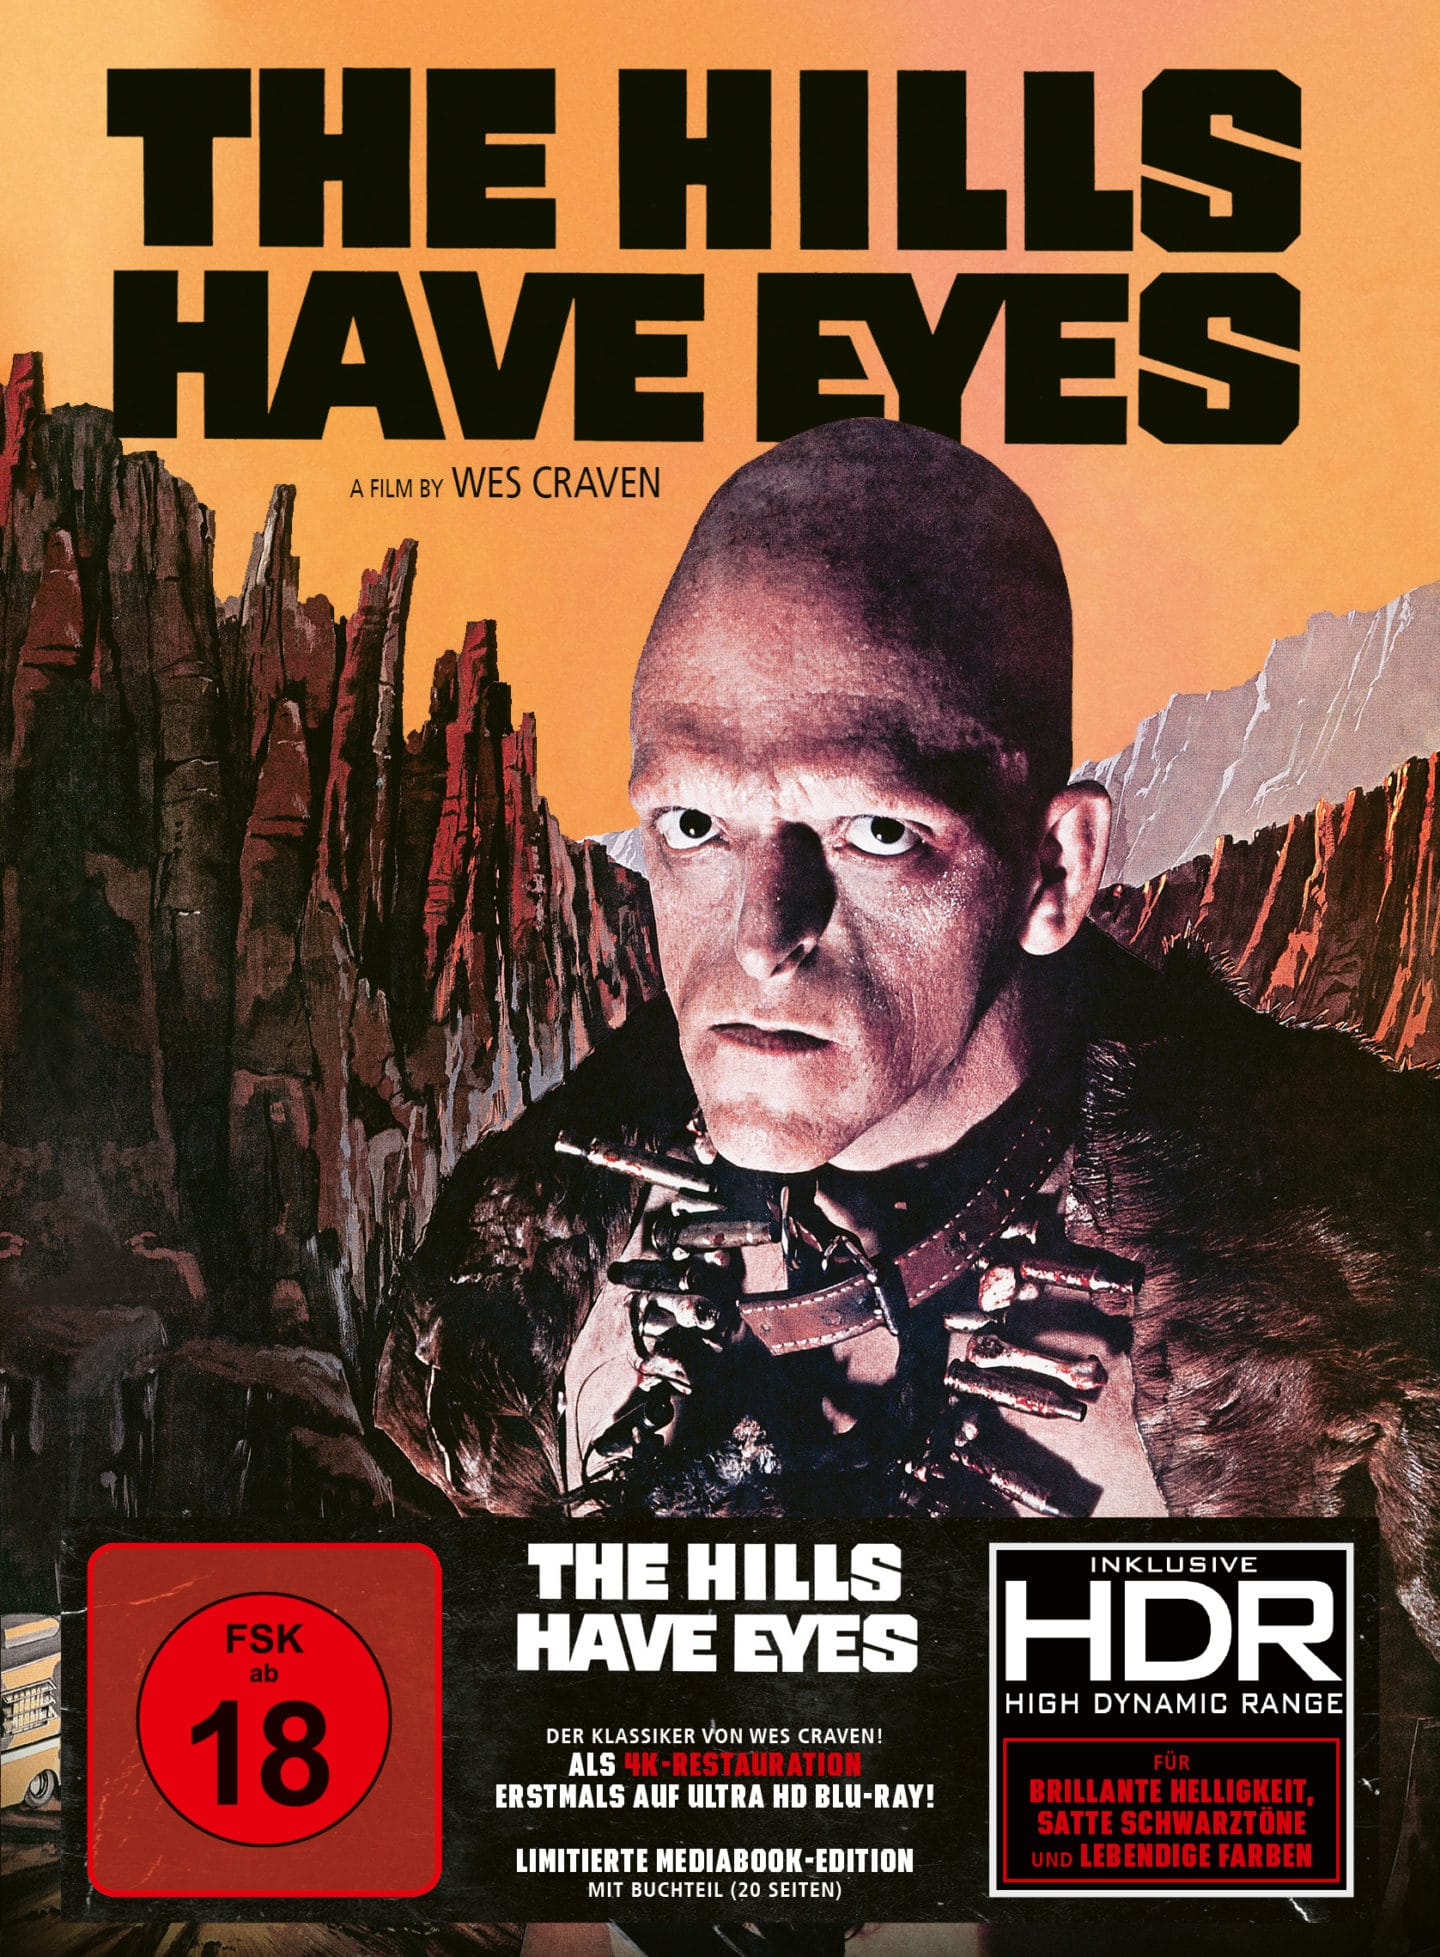 The Hills Have Eyes – Mediabook 4K UHD Bluray HDR